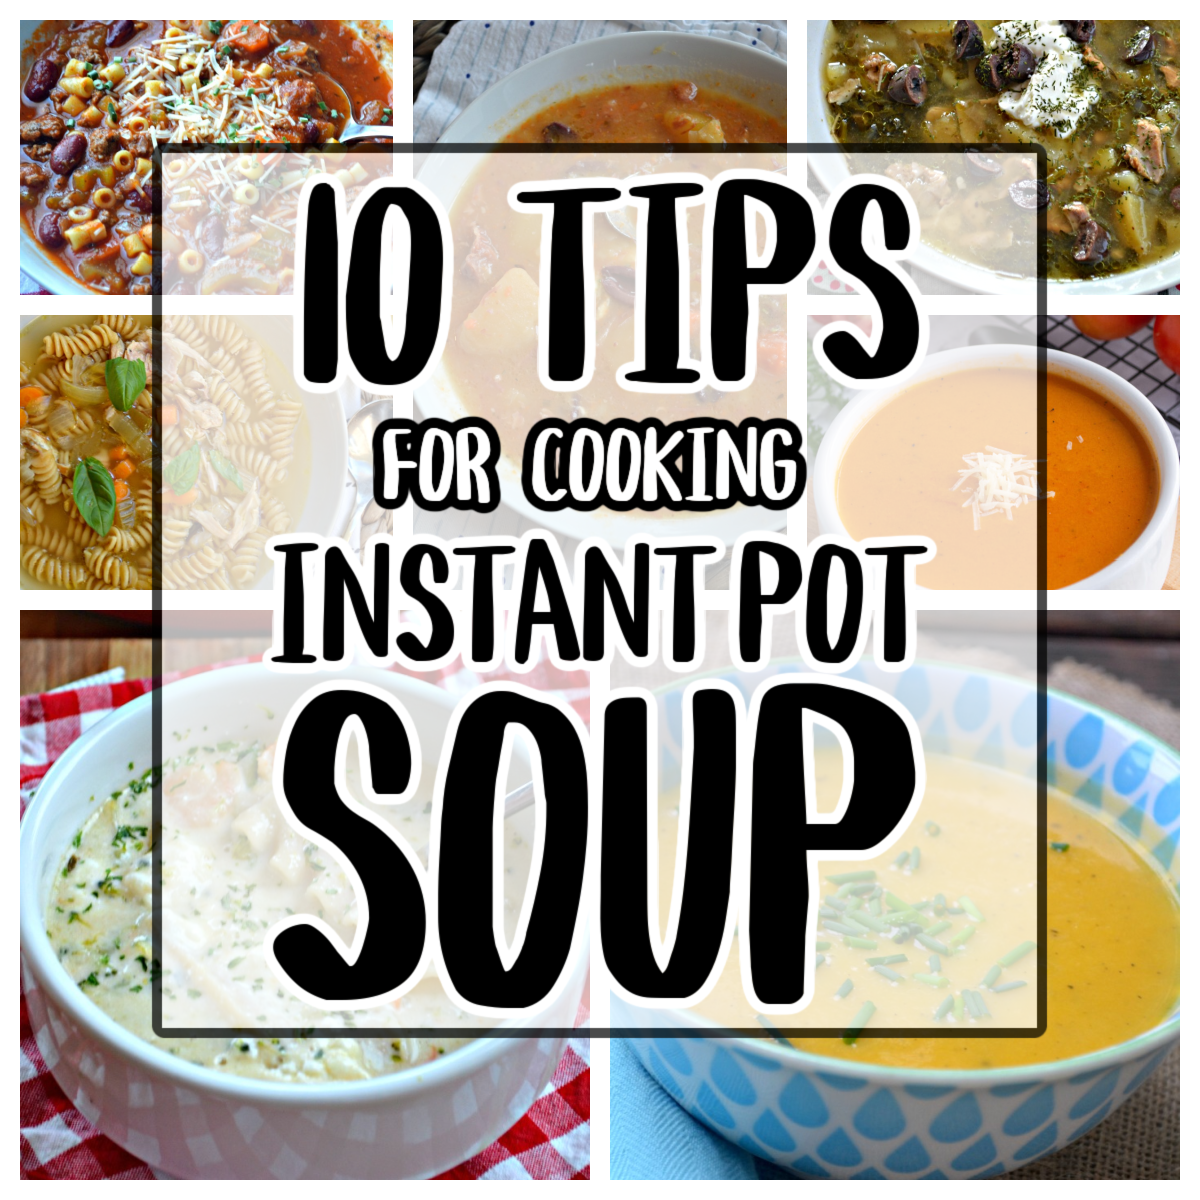 https://makethebestofeverything.com/wp-content/uploads/2019/11/10-tips-for-cooking-instant-pot-soup.png